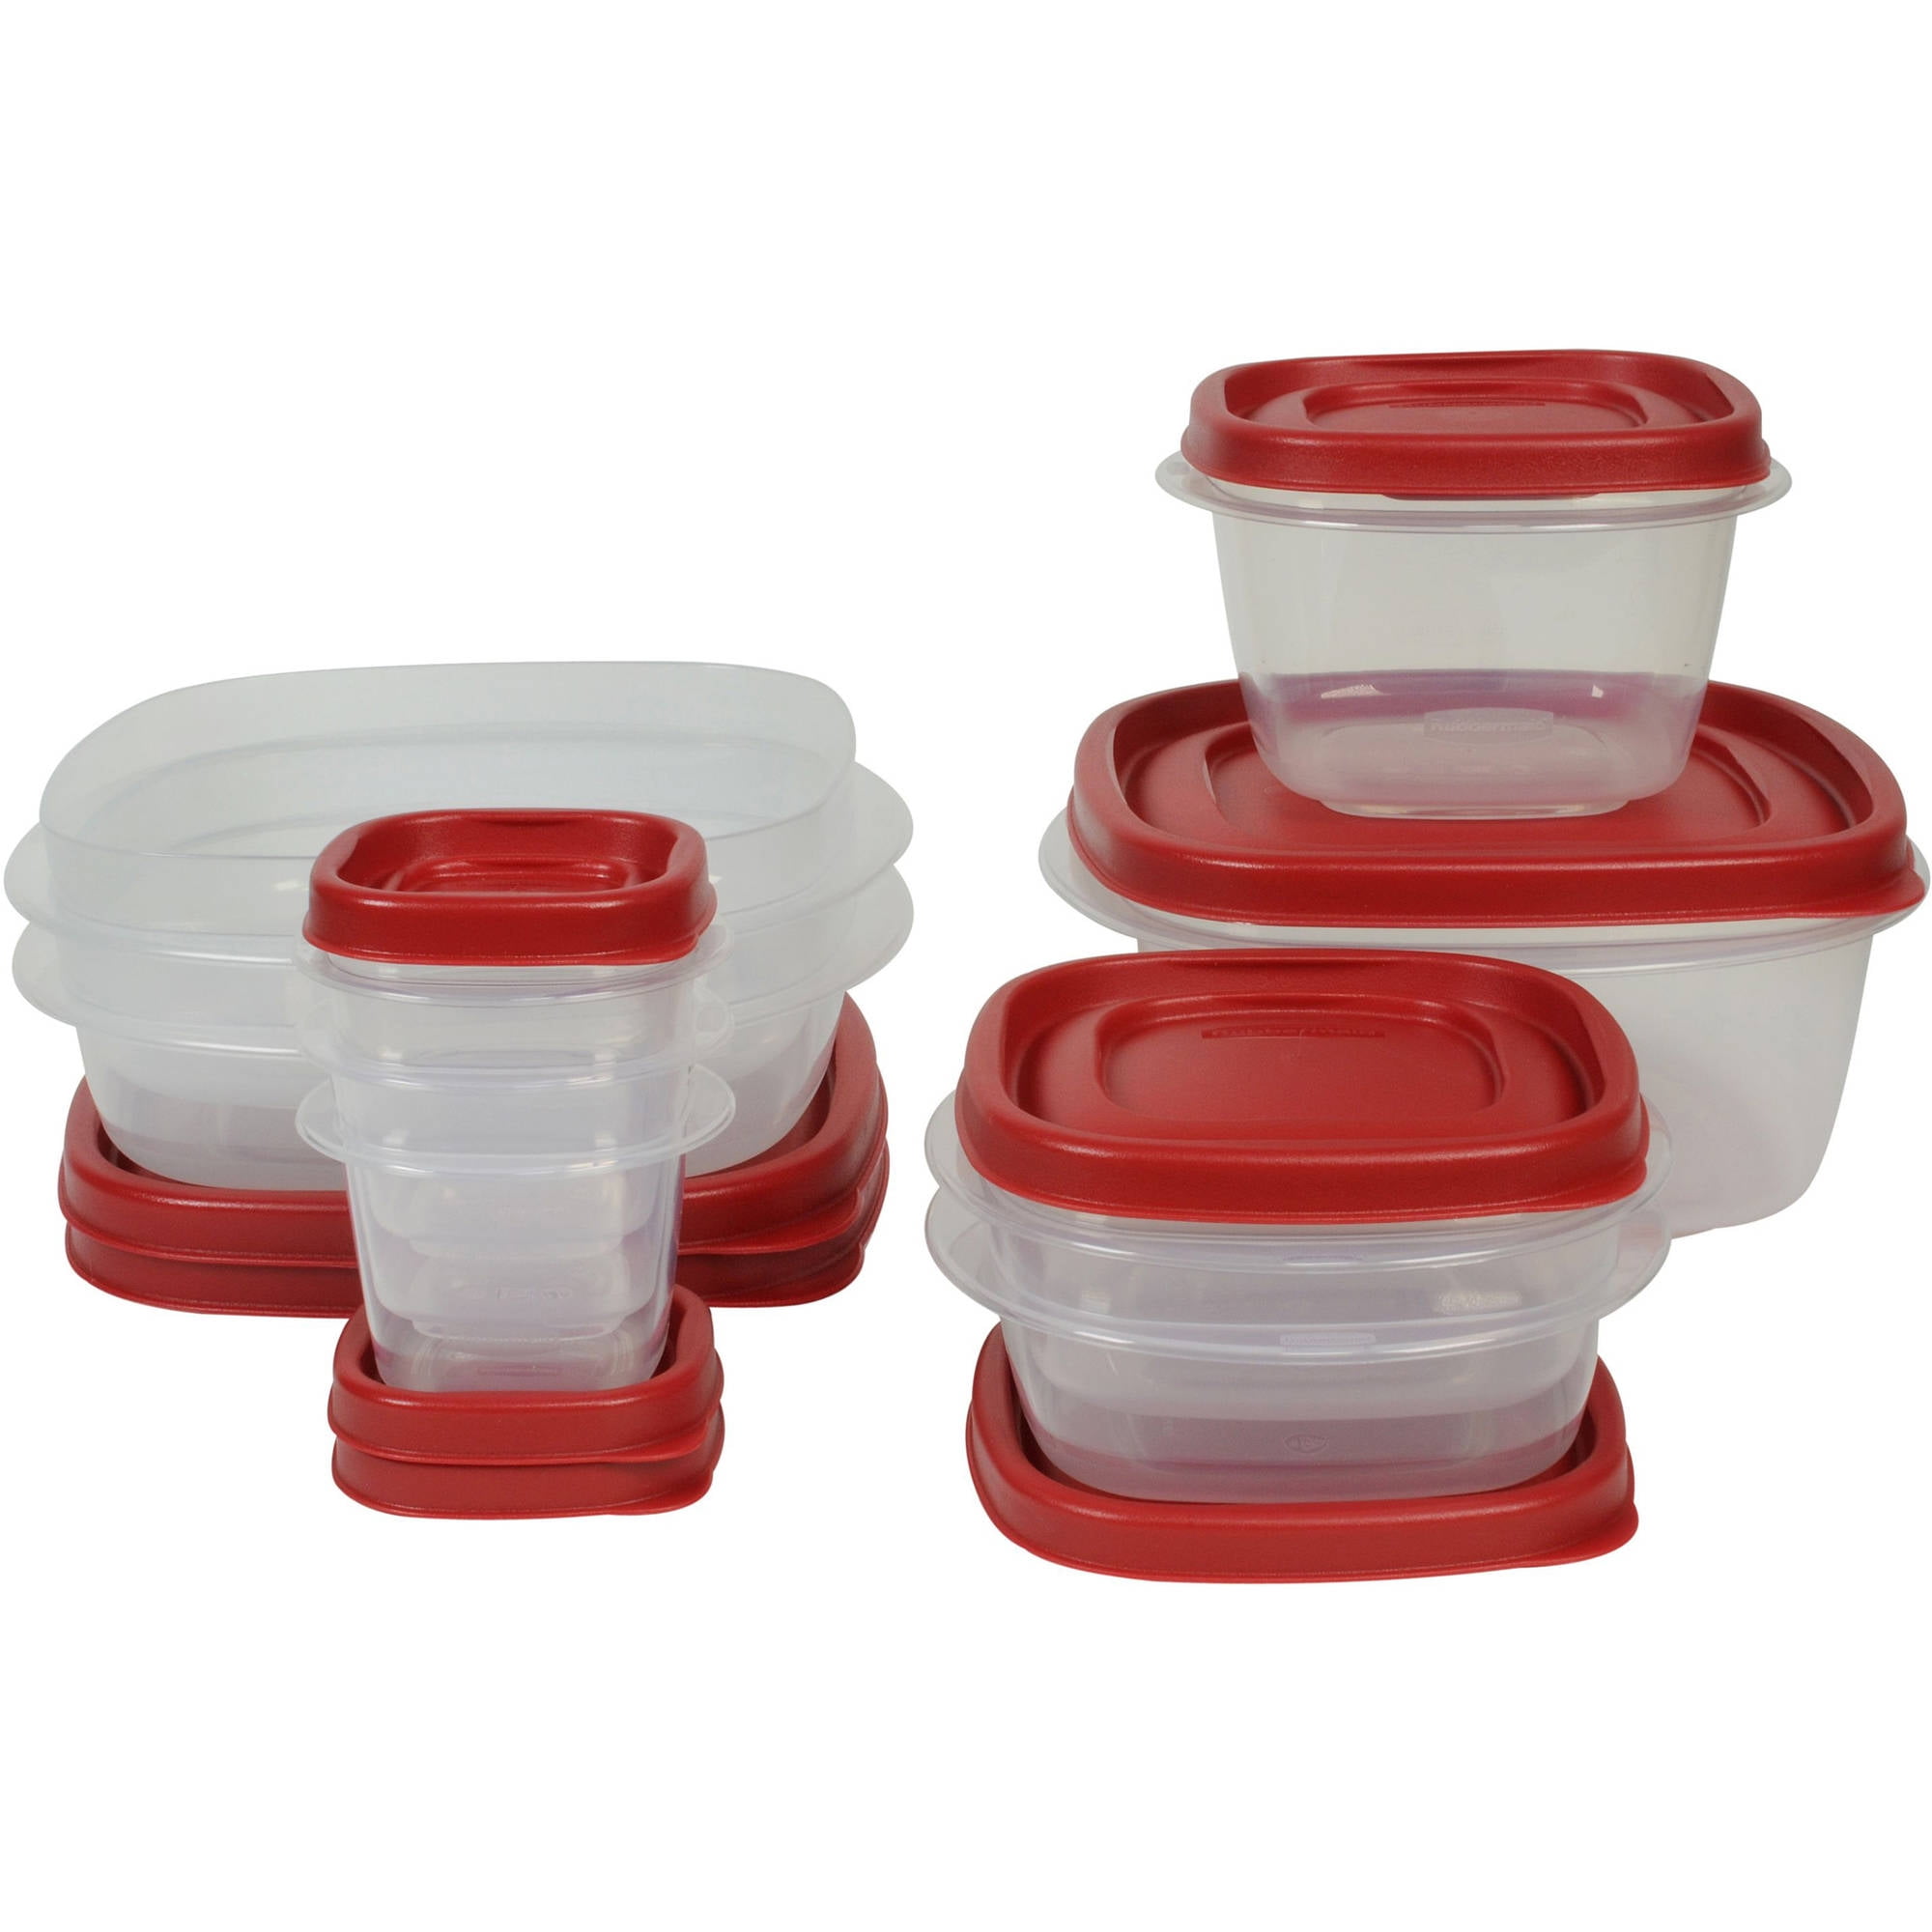 Rubbermaid Easy Find Lids 9 Cup Container and Lid